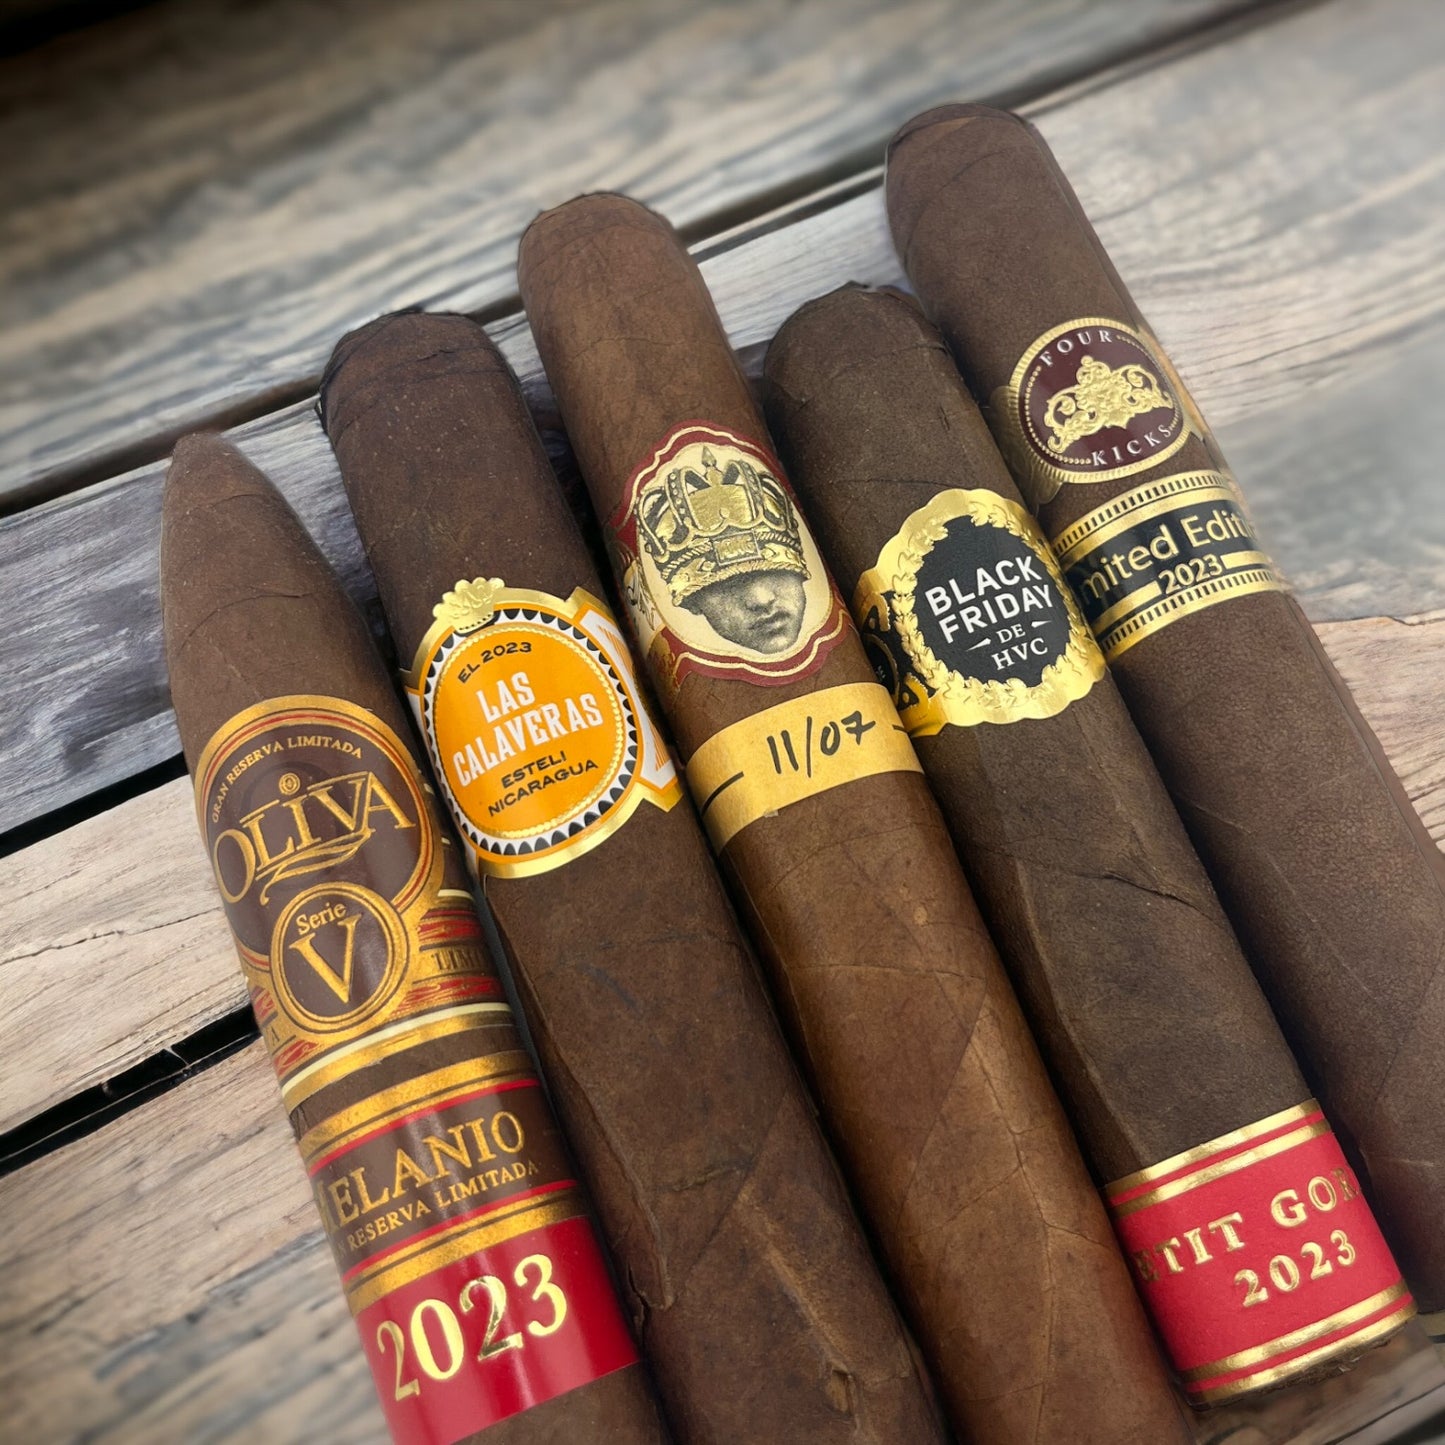 The 2023 LIMITED EDITION Sampler